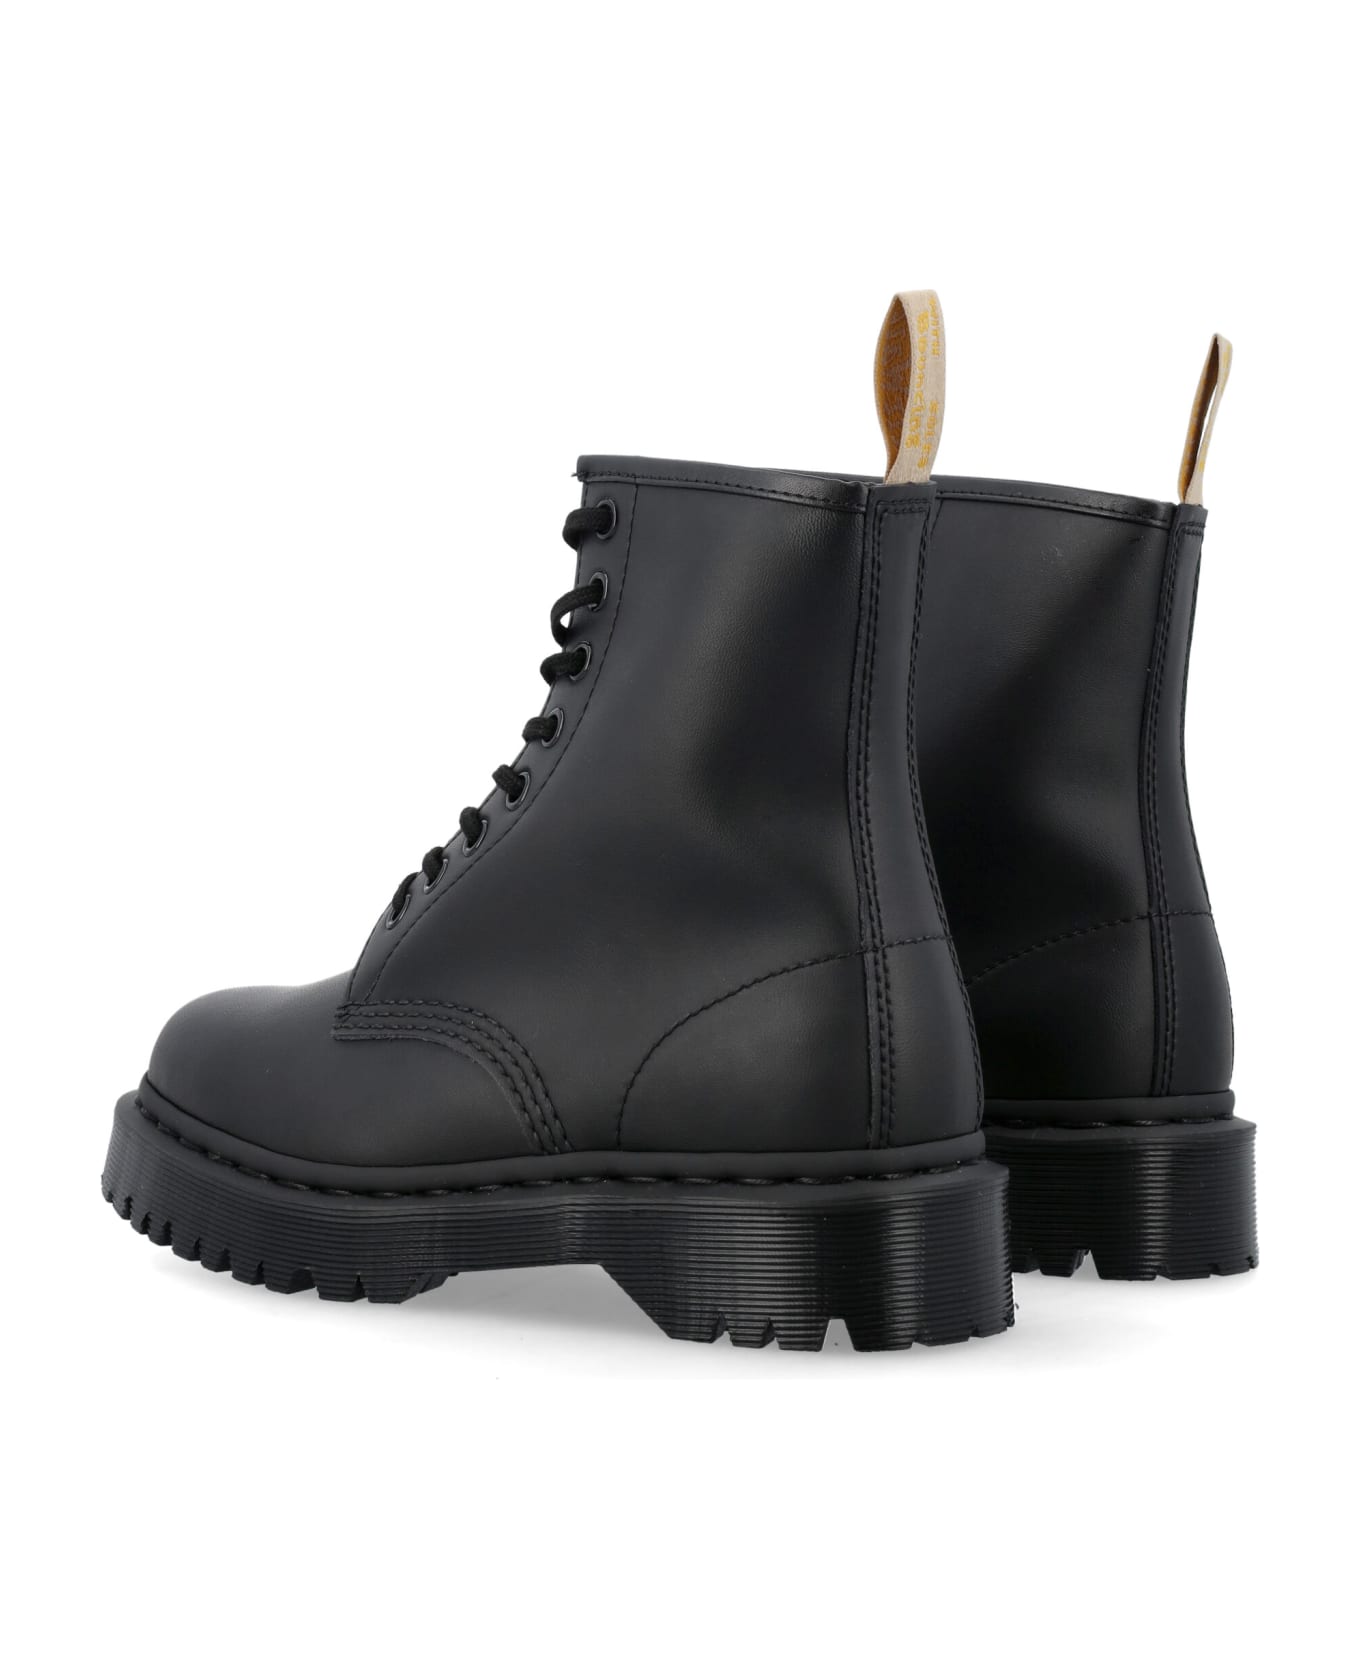 Dr. Martens 1460 Mono Combat Boots In Black Leather - BLACK ブーツ